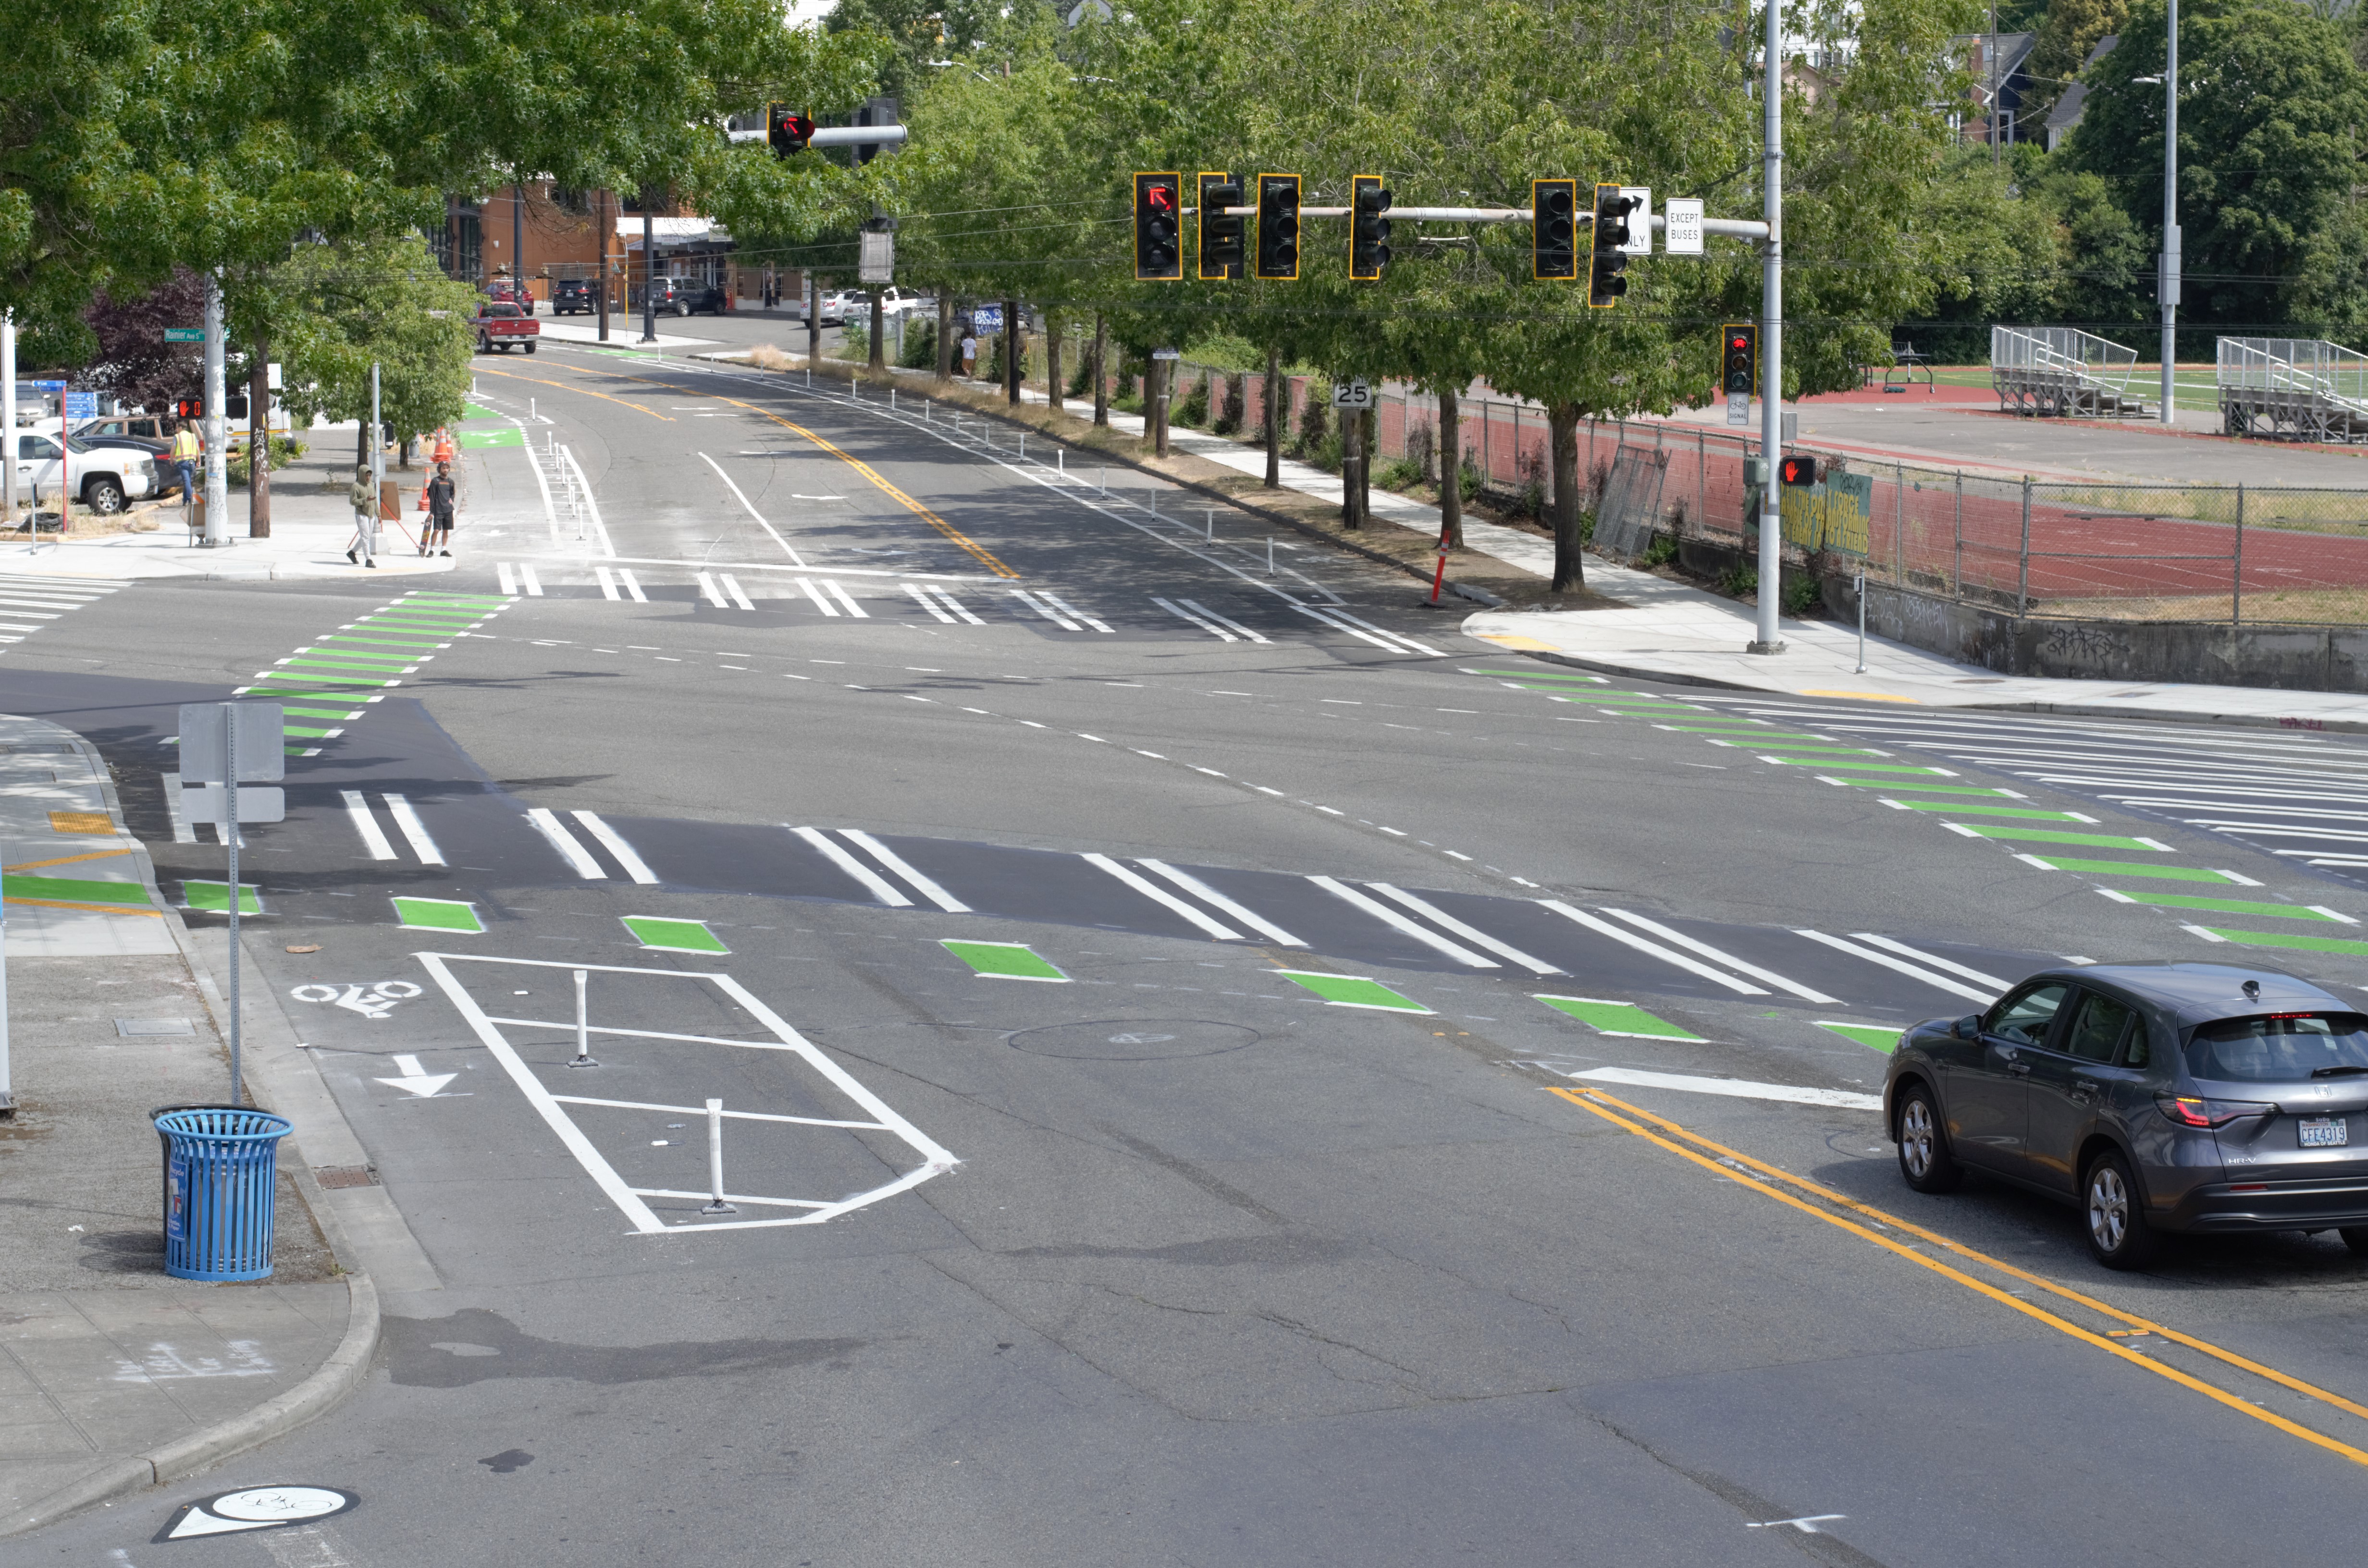 The updated intersection of MLK Jr Way S and Rainier Ave S with new protected bike lanes, crosswalks, bike signals, and clearer street markings.